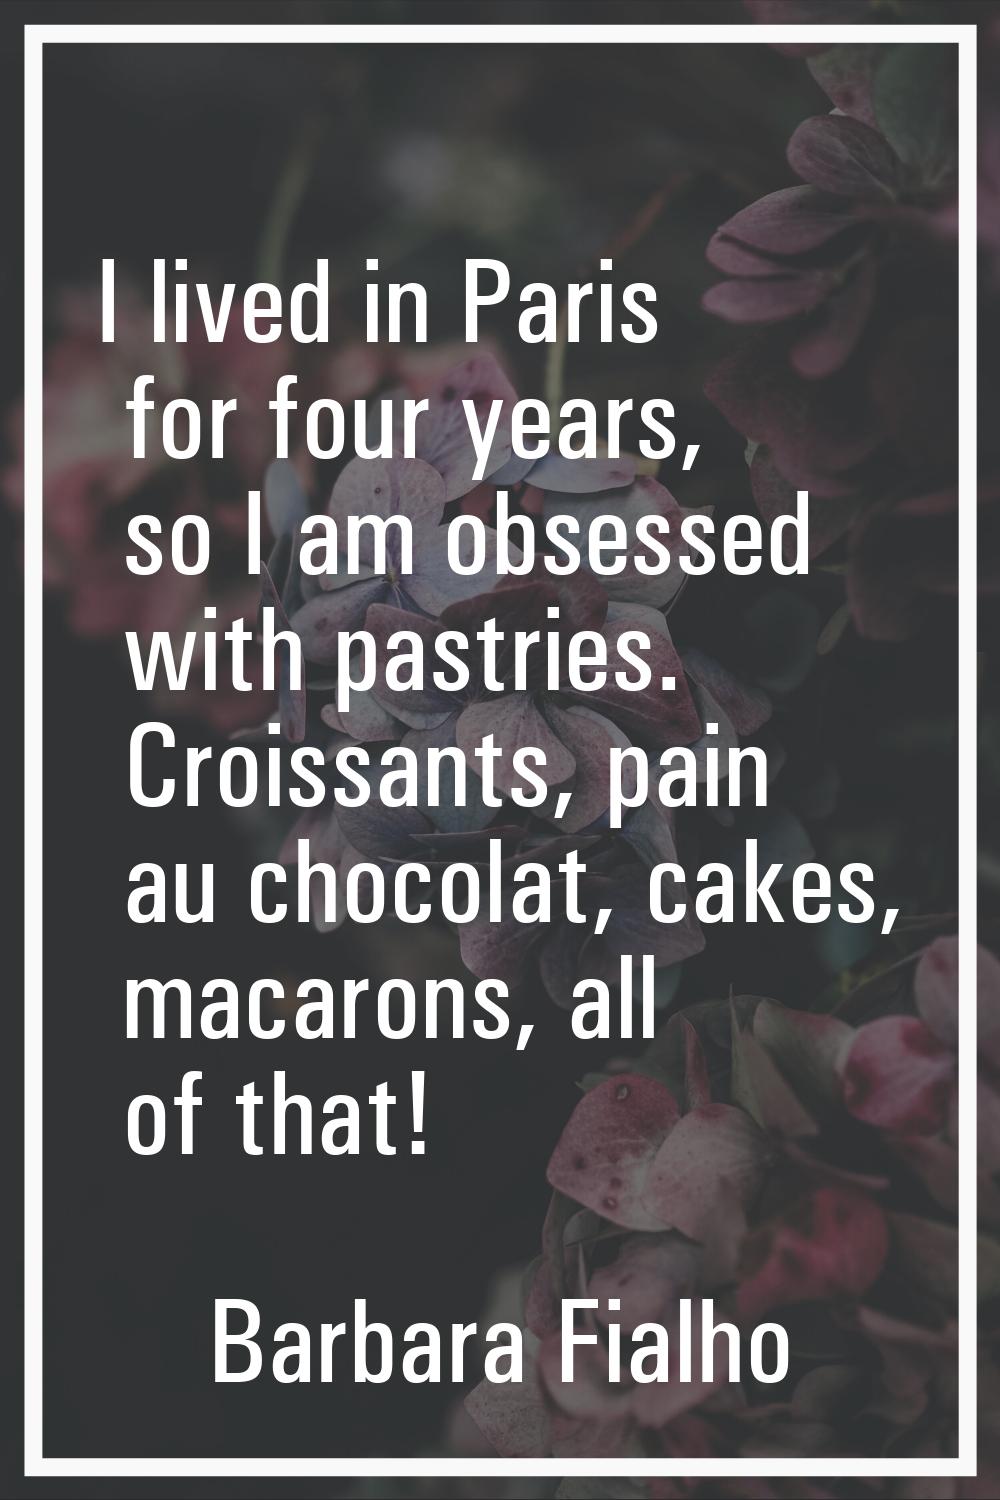 I lived in Paris for four years, so I am obsessed with pastries. Croissants, pain au chocolat, cake